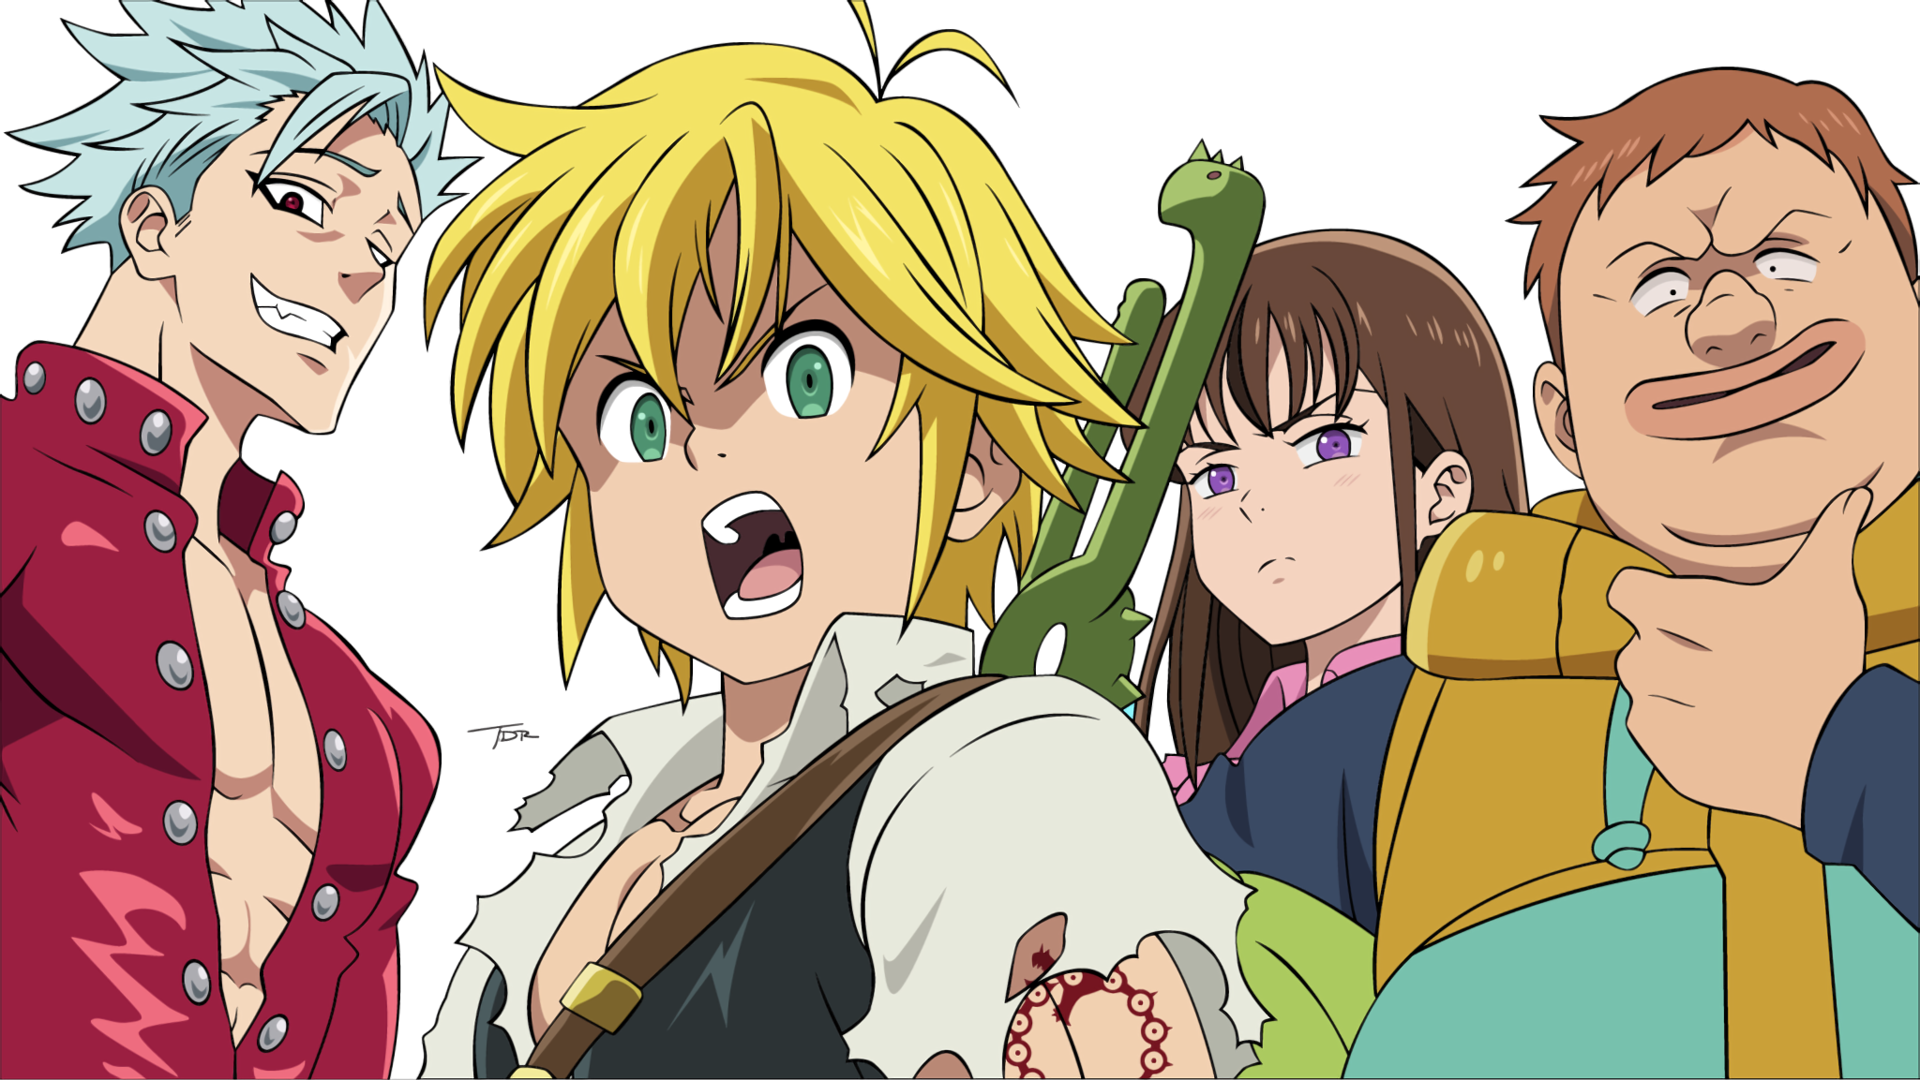 The Seven Deadly Sins HD Wallpaper Background Image